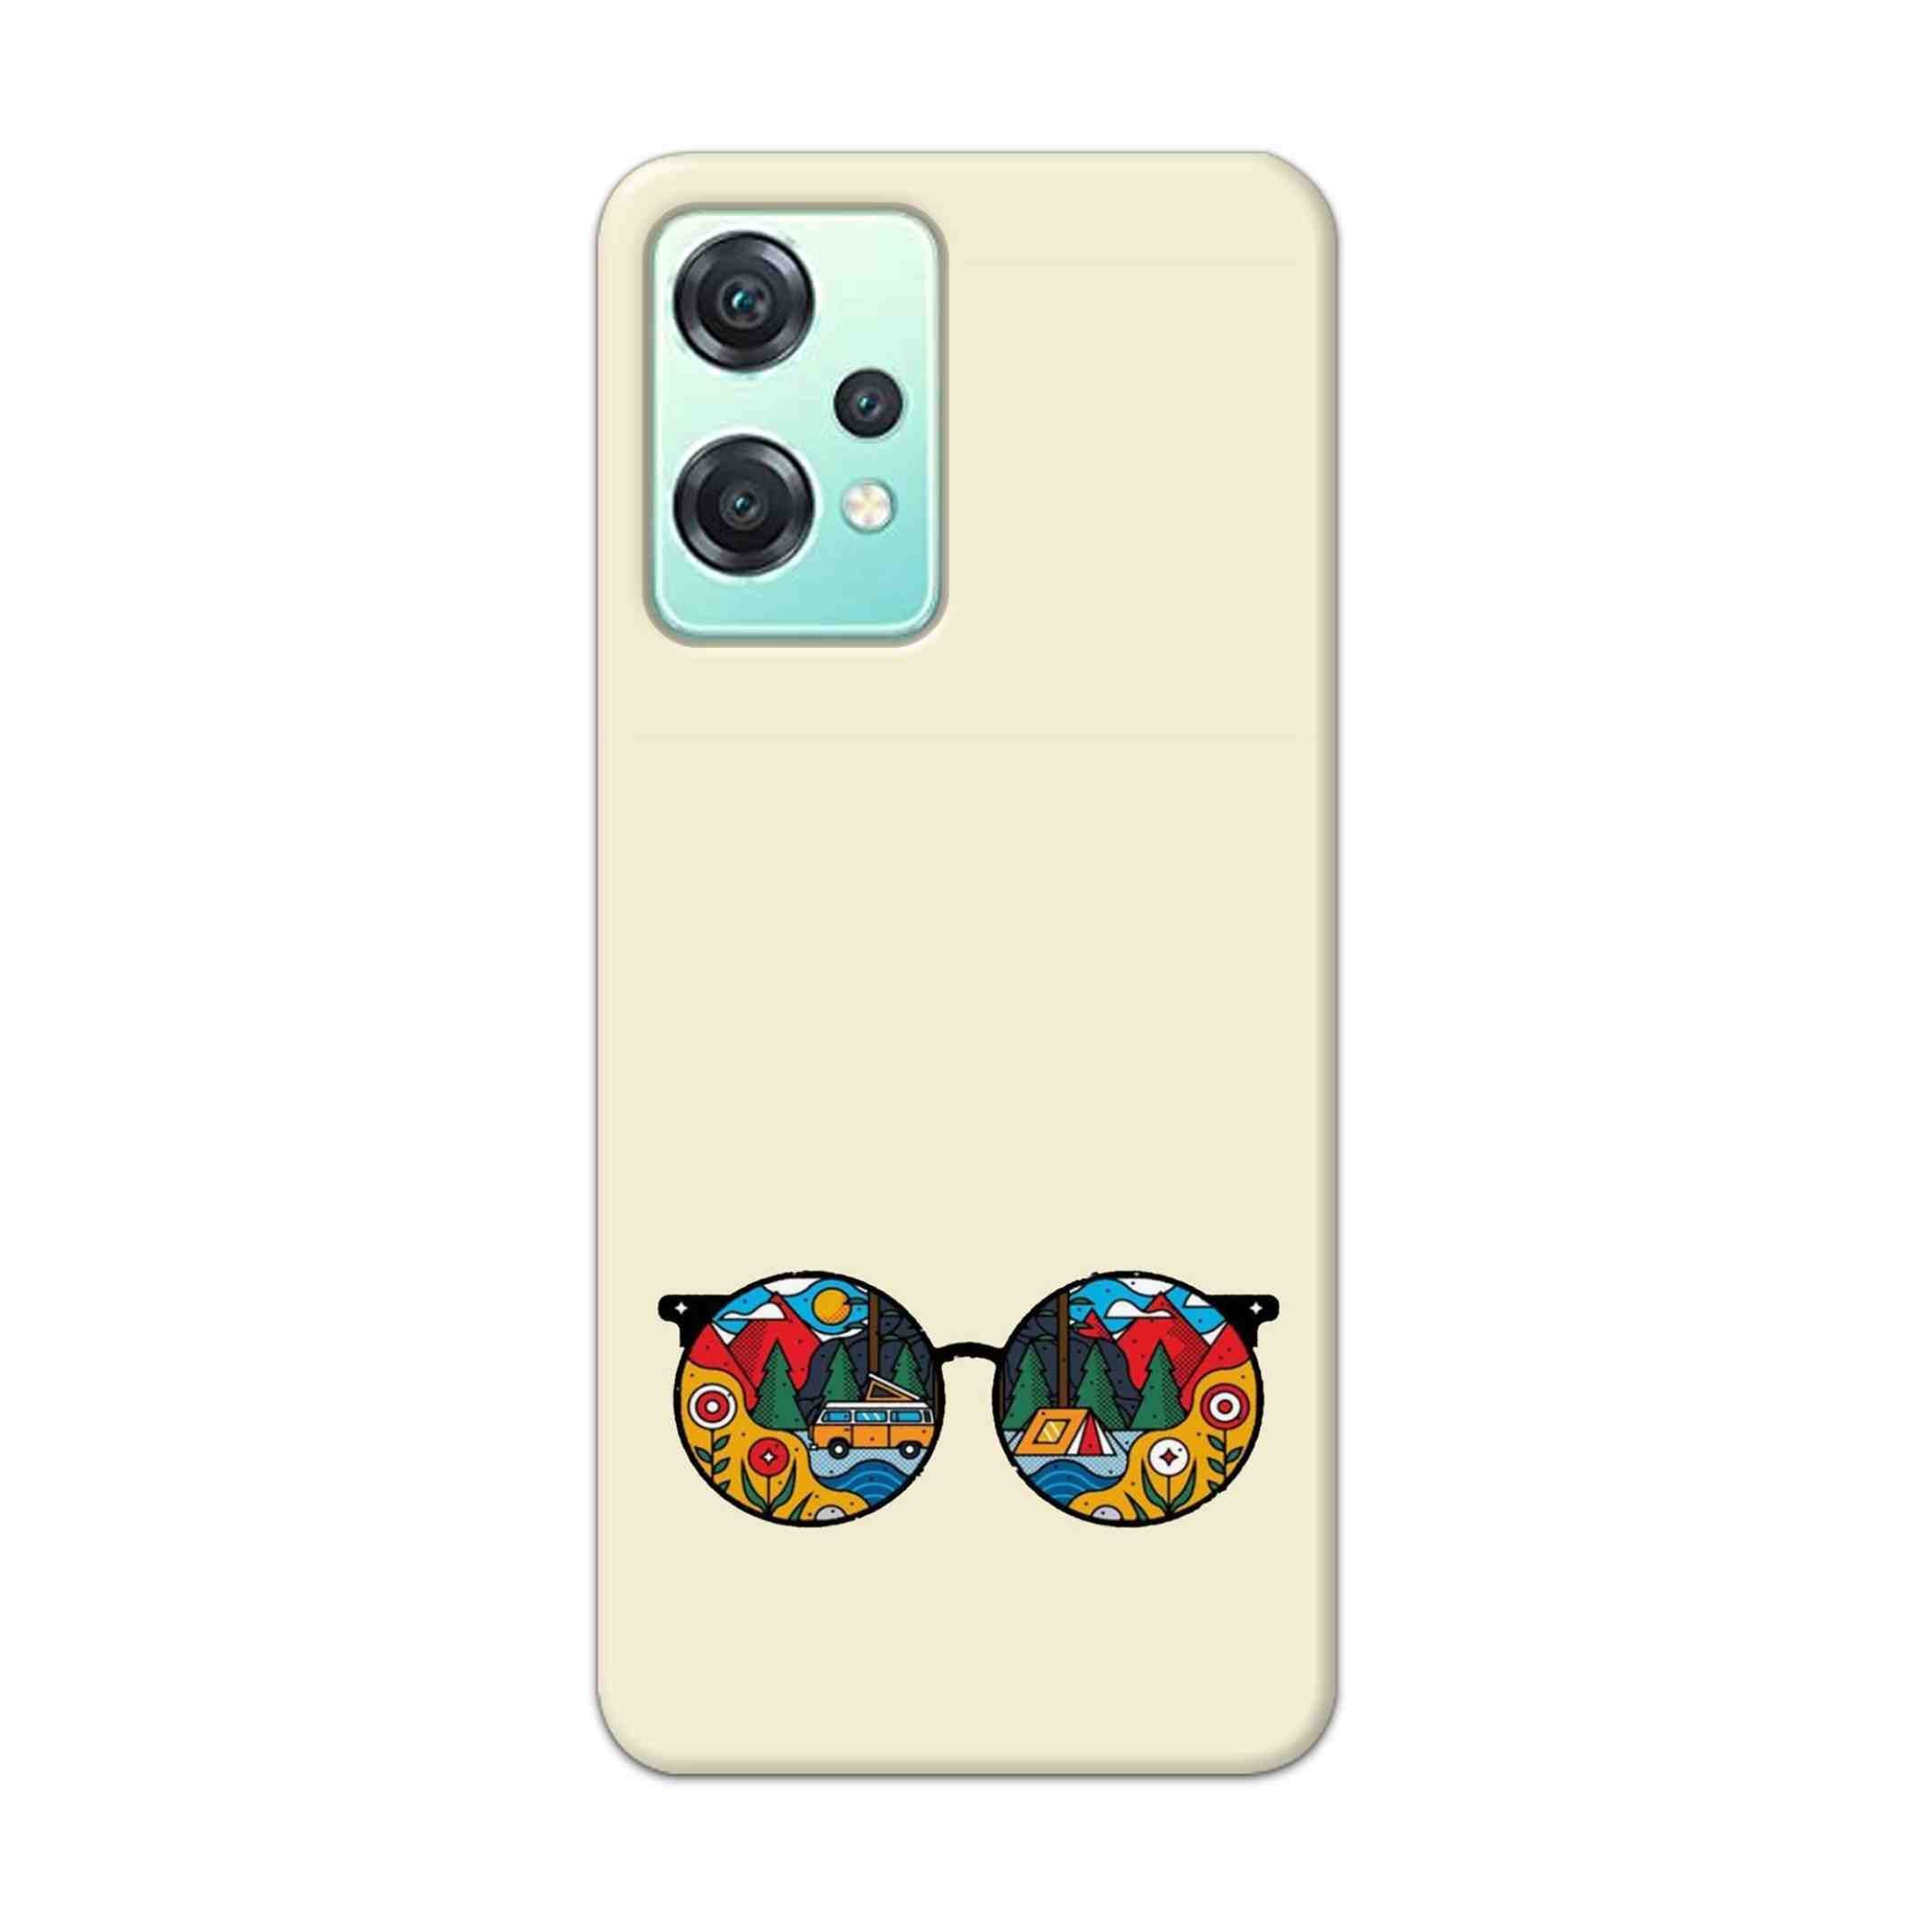 Buy Rainbow Sunglasses Hard Back Mobile Phone Case Cover For OnePlus Nord CE 2 Lite 5G Online